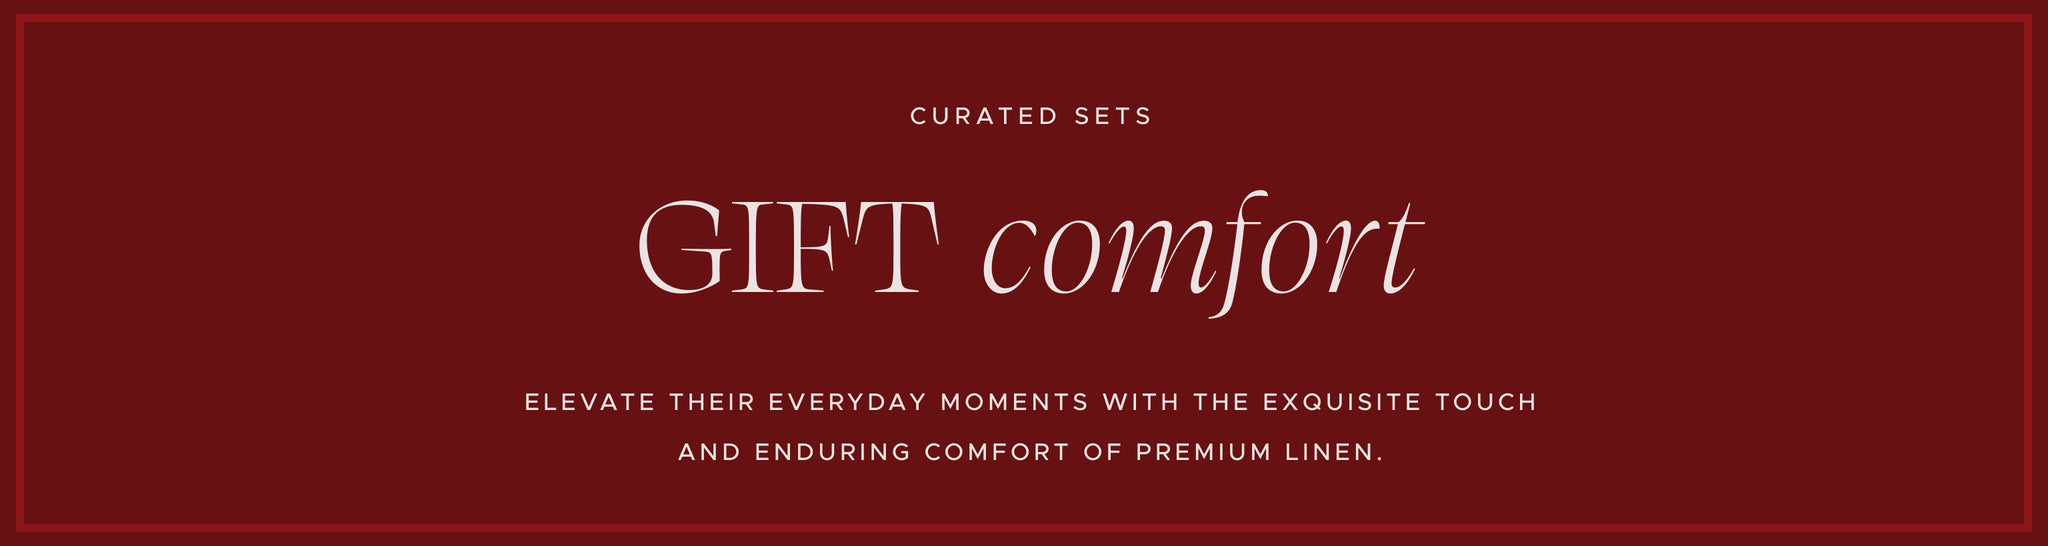 GIFT COMFORT:  Elevate their everyday moments with the exquisite touch and enduring comfort of premium linen.